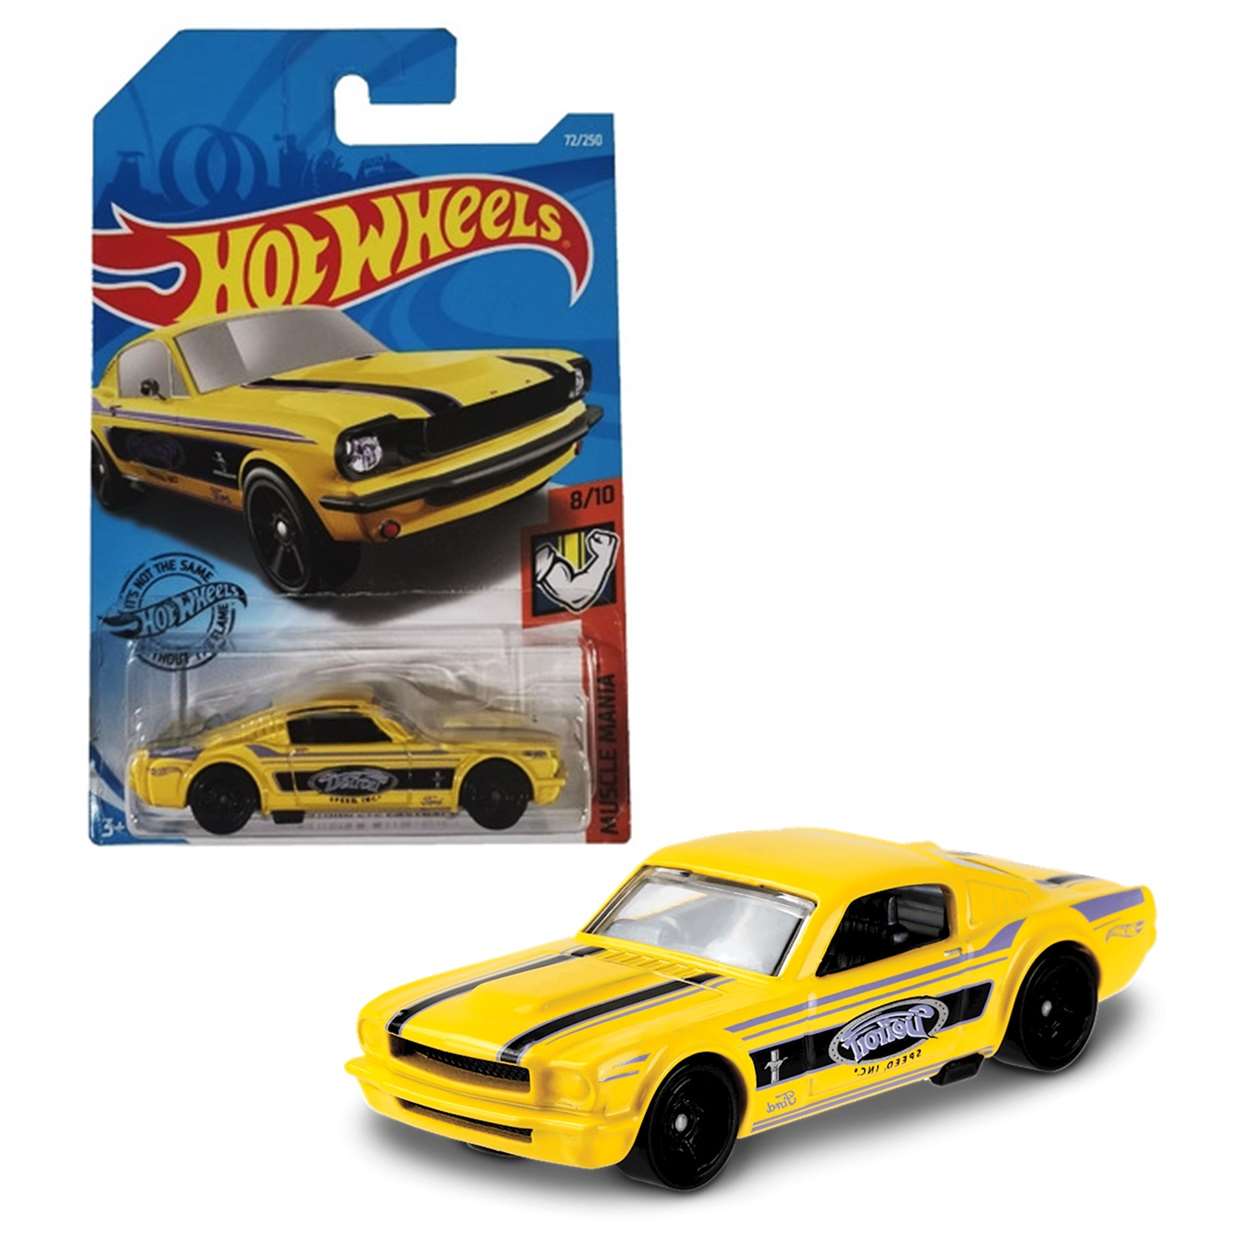 65 Mustang 2+2 Fastback 8/10 Hot Wheels Muscle Mania